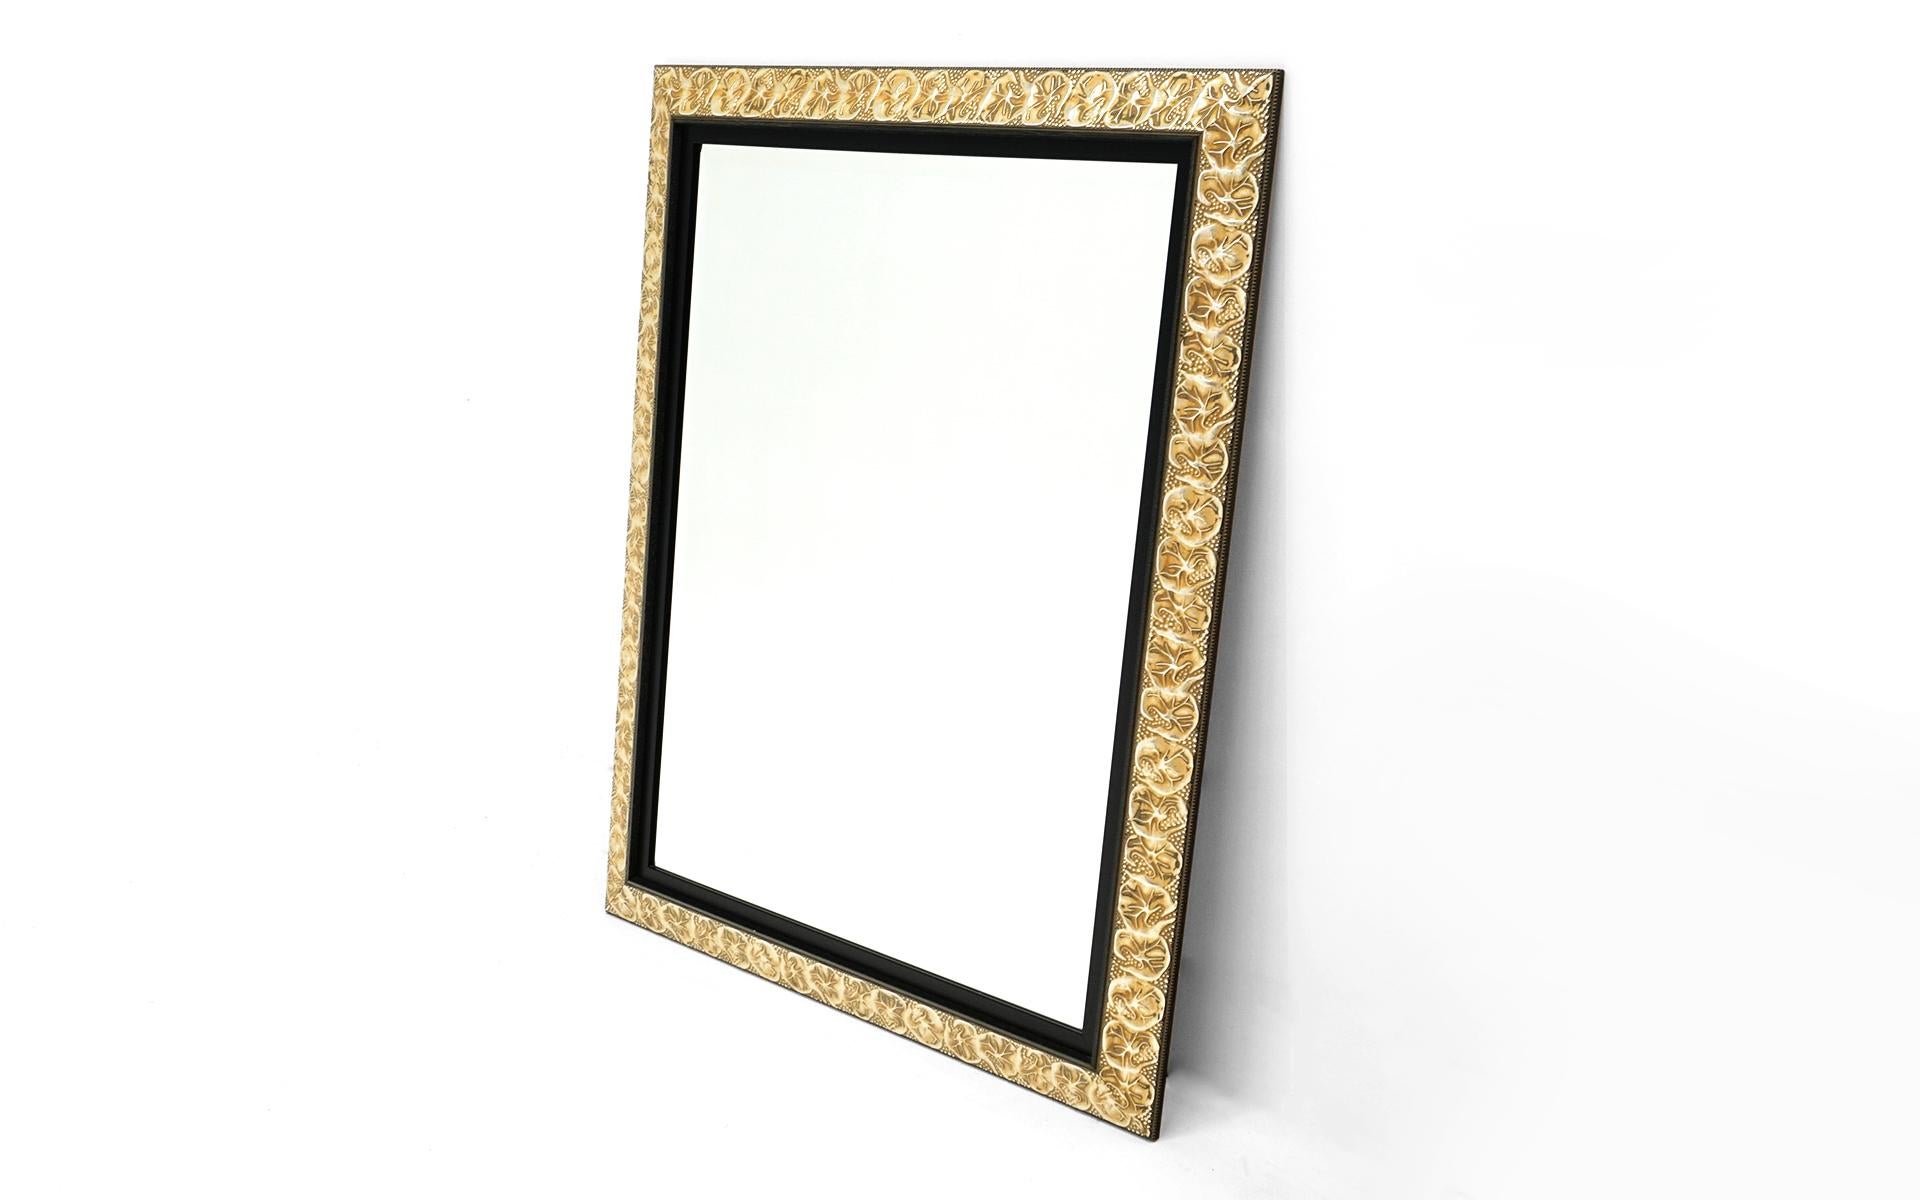 Repoussé (reverse hand hammered aluminum frame) wall mirror with beveled edge. In as close to new condition as things come. The aluminum is anodized to a soft brass color. Genko leaf motif.